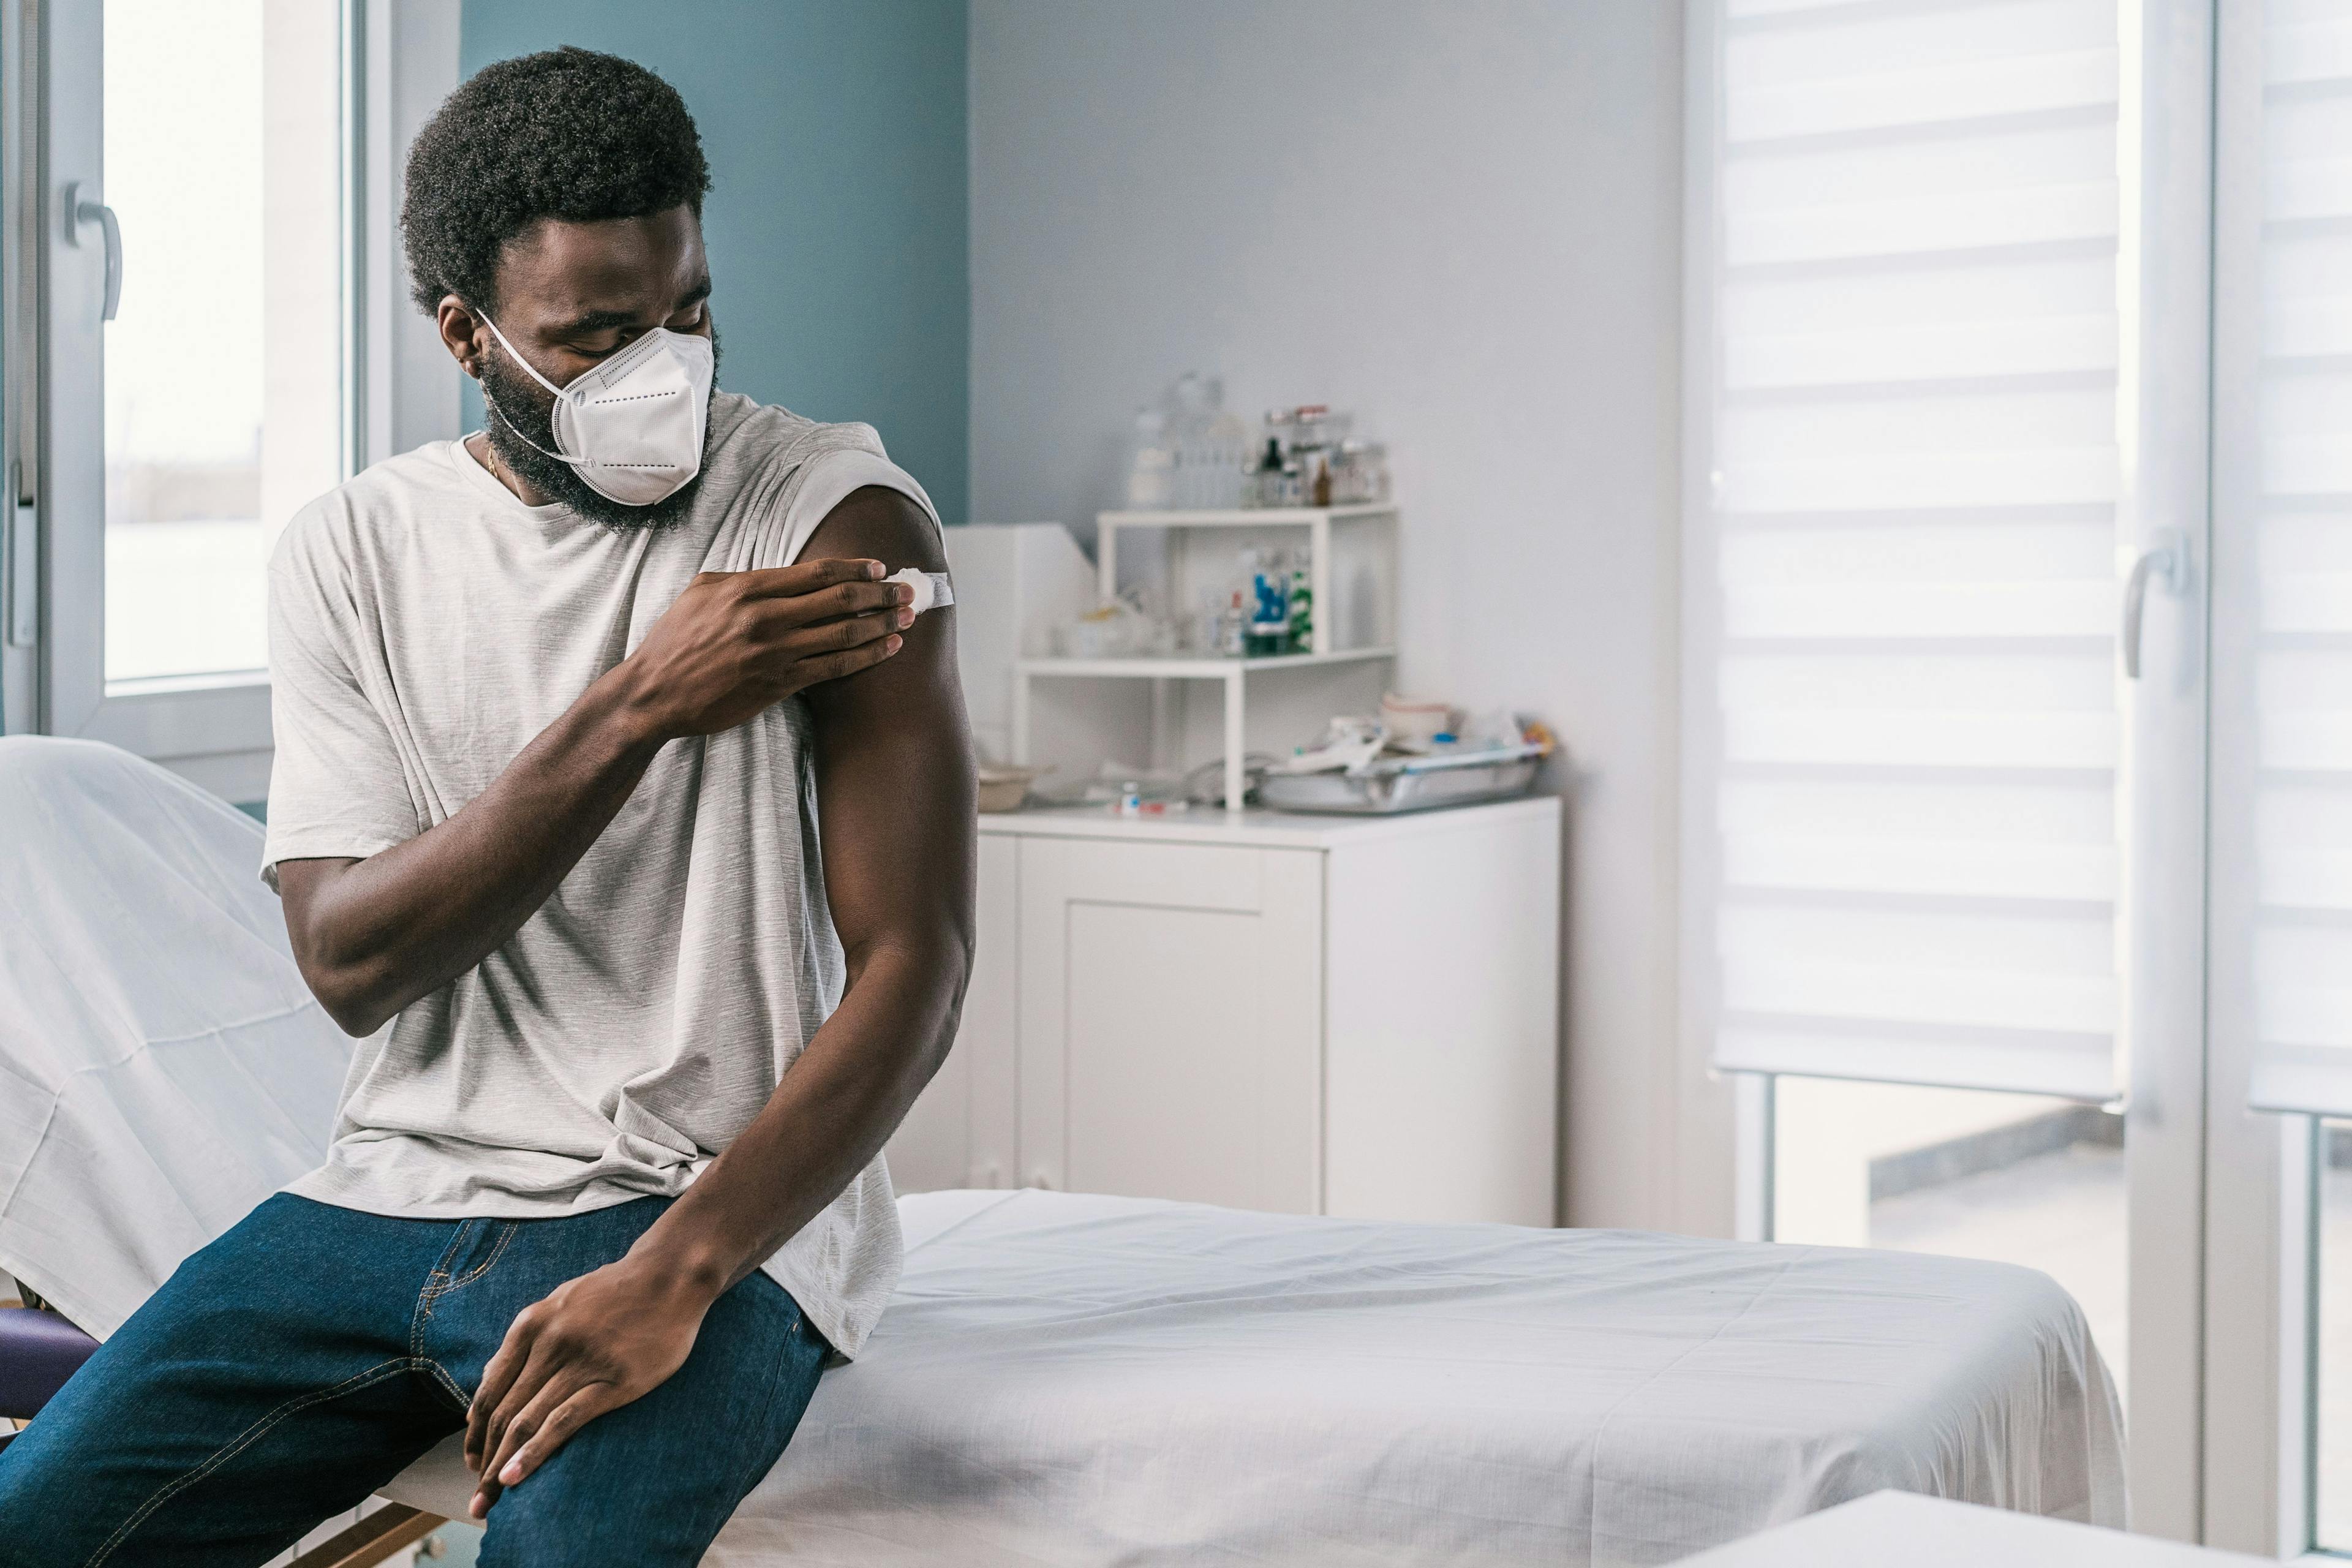 African American man patient holding cotton with alcohol disinfecting arm after covid vaccine procedure in clinic during coronavirus outbreak - Image credit: Alvaro Sanchez/ADDICTIVE STOCK | stock.adobe.com